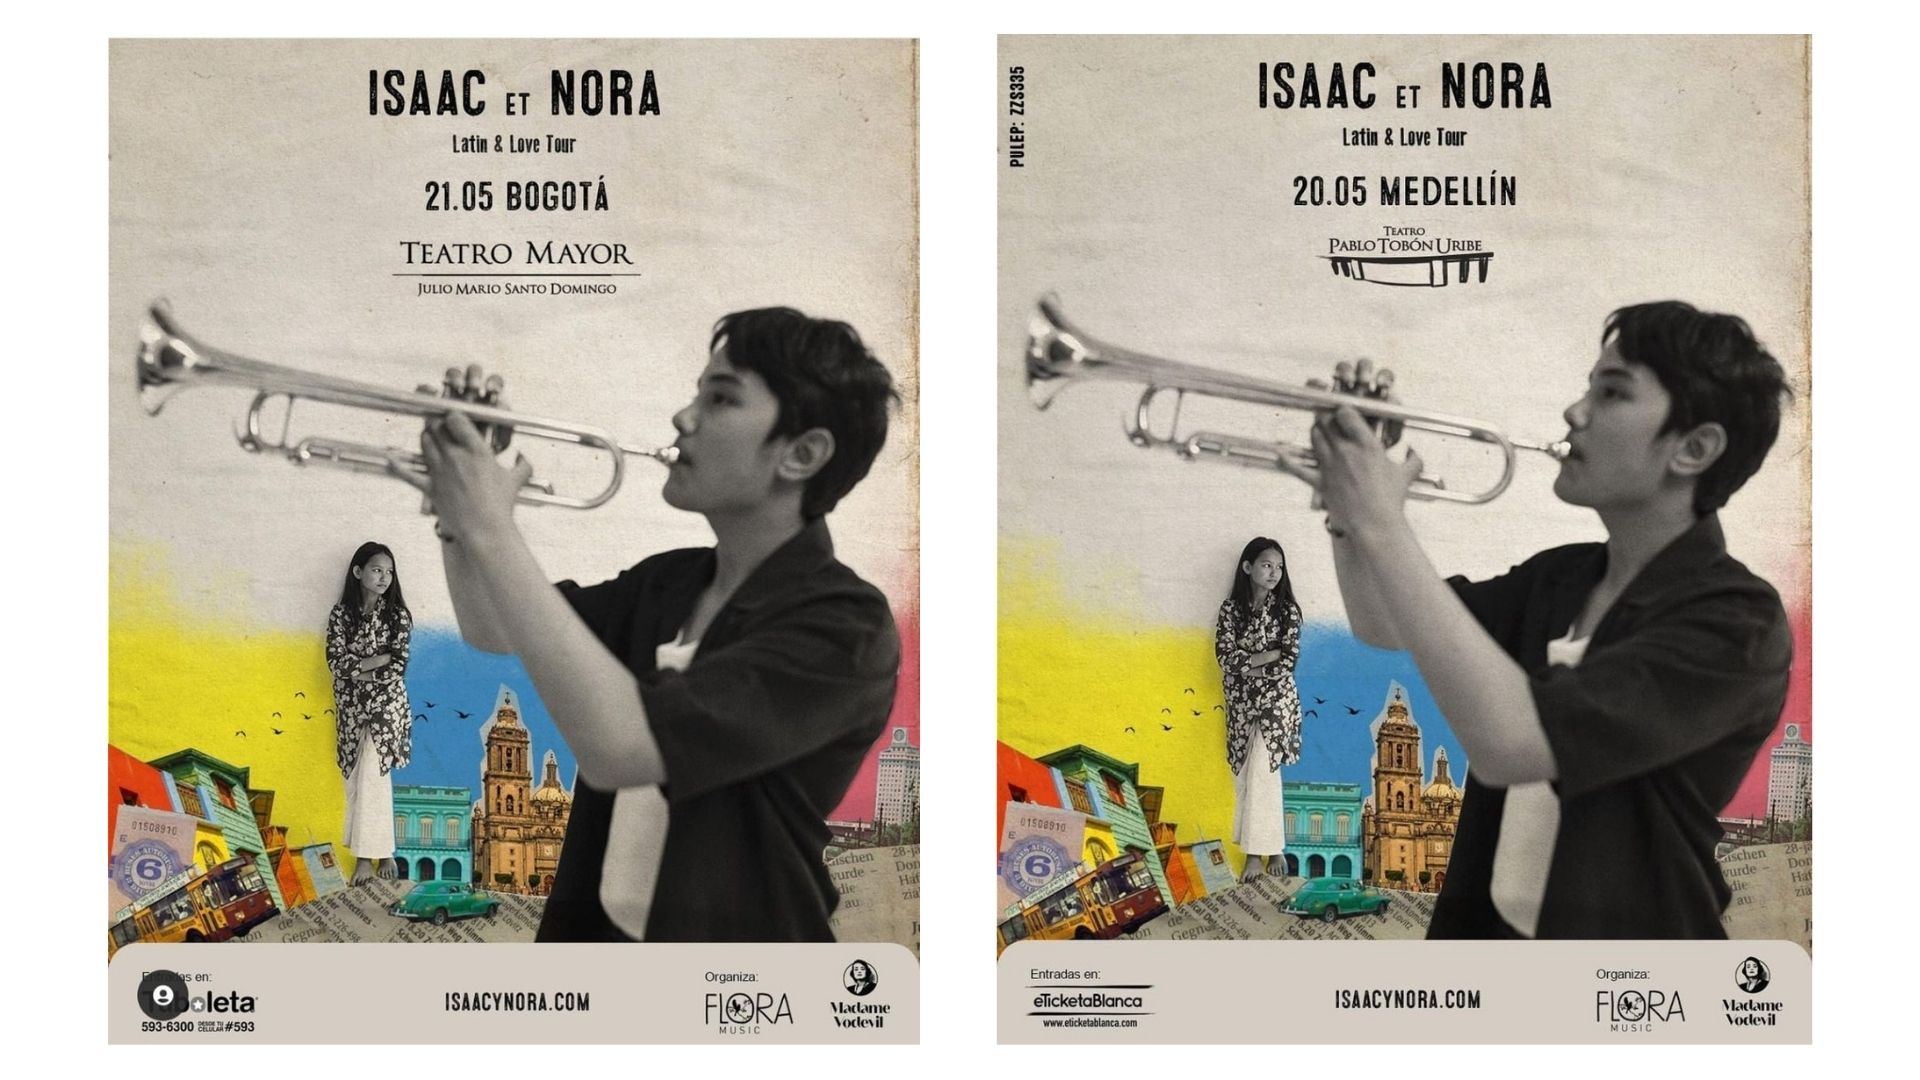 The French children, Isaac and Nora, will perform in Bogotá on May 20 at the Teatro Mayor Julio Mario Santo Domingo, and Medellín on May 21 at the Pablo Tobón Uribe Theater.  Taken from Instagram @isaacynora